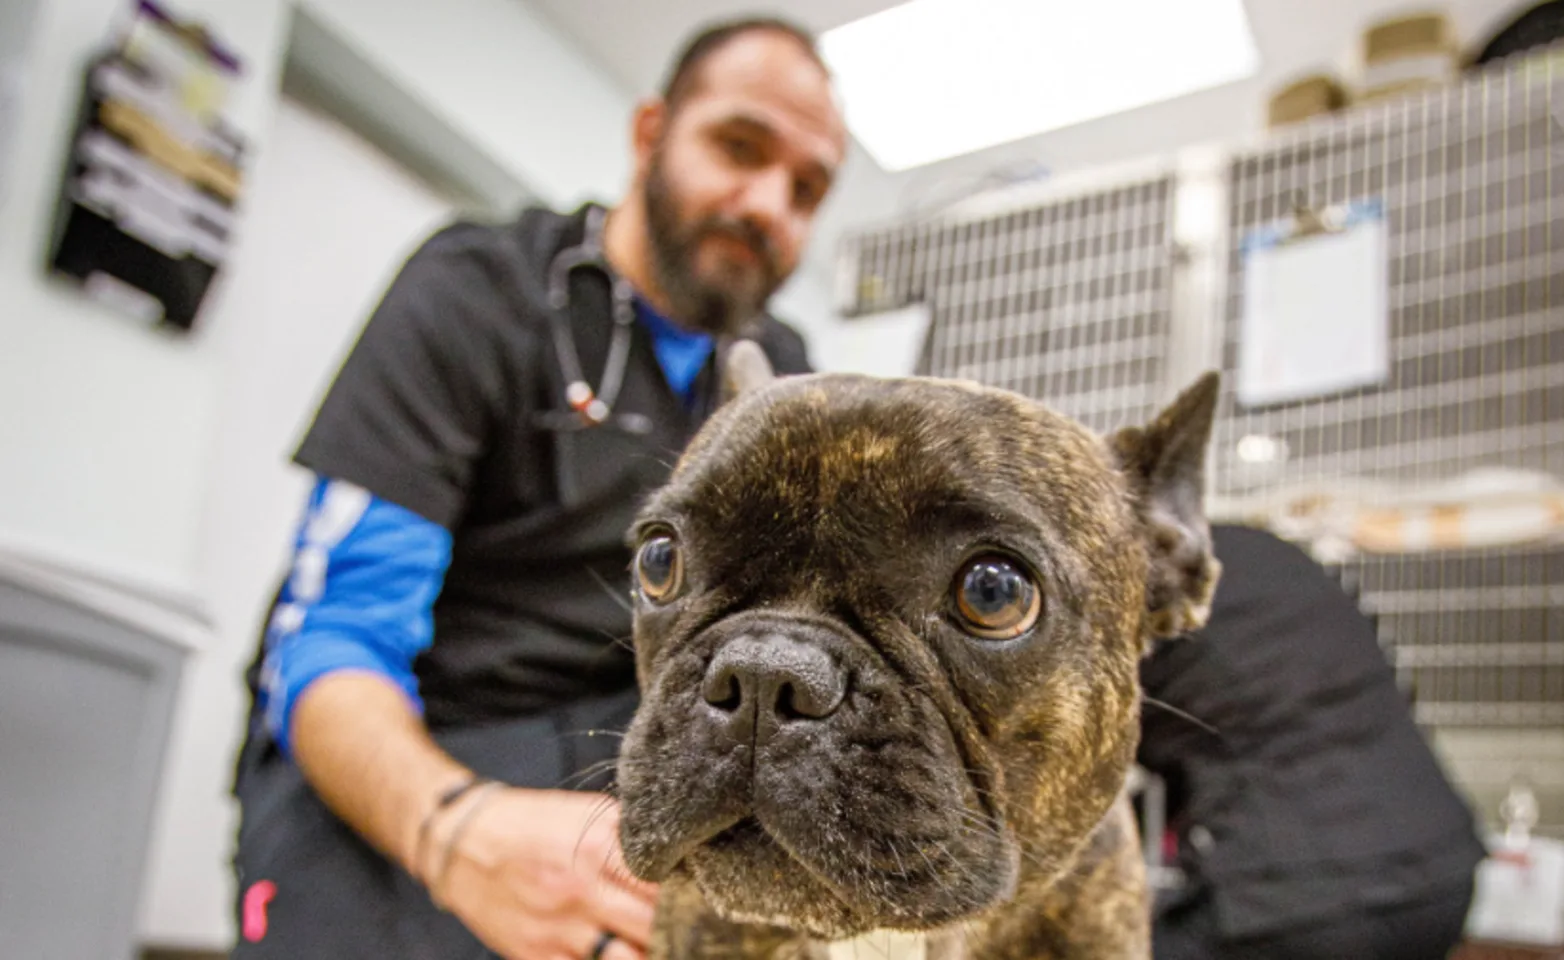 Small brindle dog wearing a blue bandage and standing with a staff member